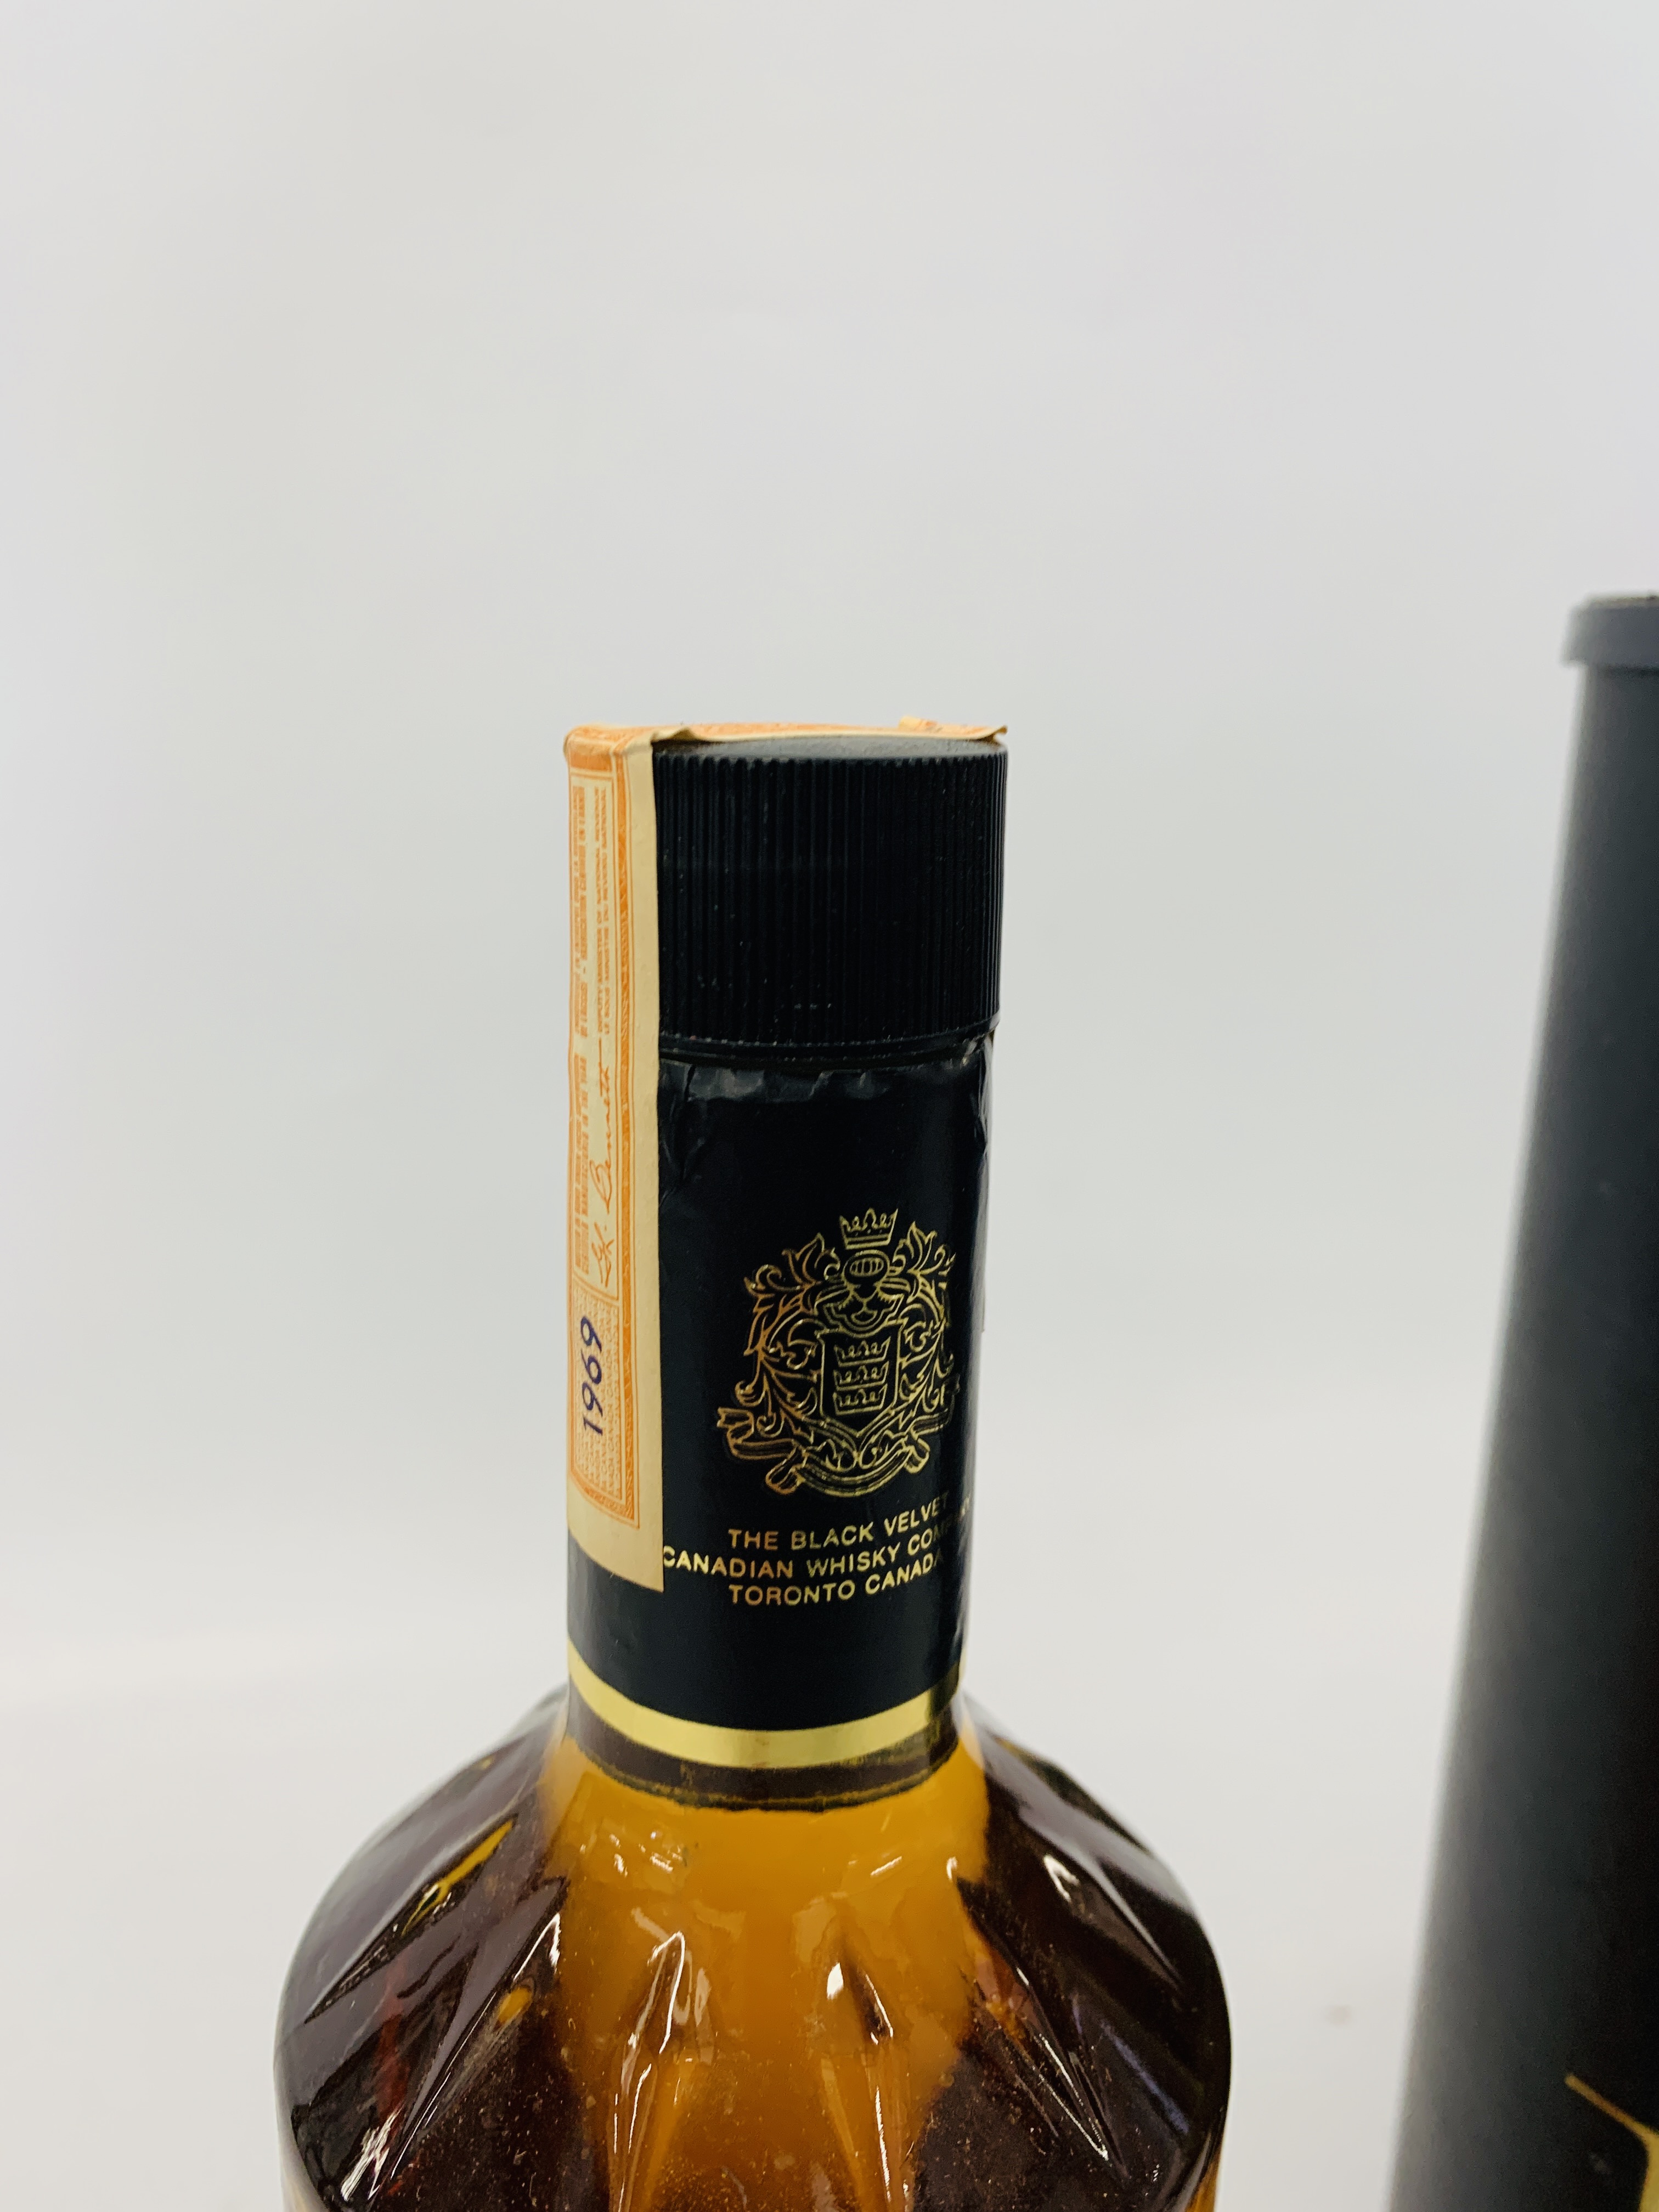 710ml BOTTLE GILBEY BLACK VELVET CANADIAN WHISKY WITH INTACT 1969 SEAL IN ORIGINAL TUBE - Image 3 of 4